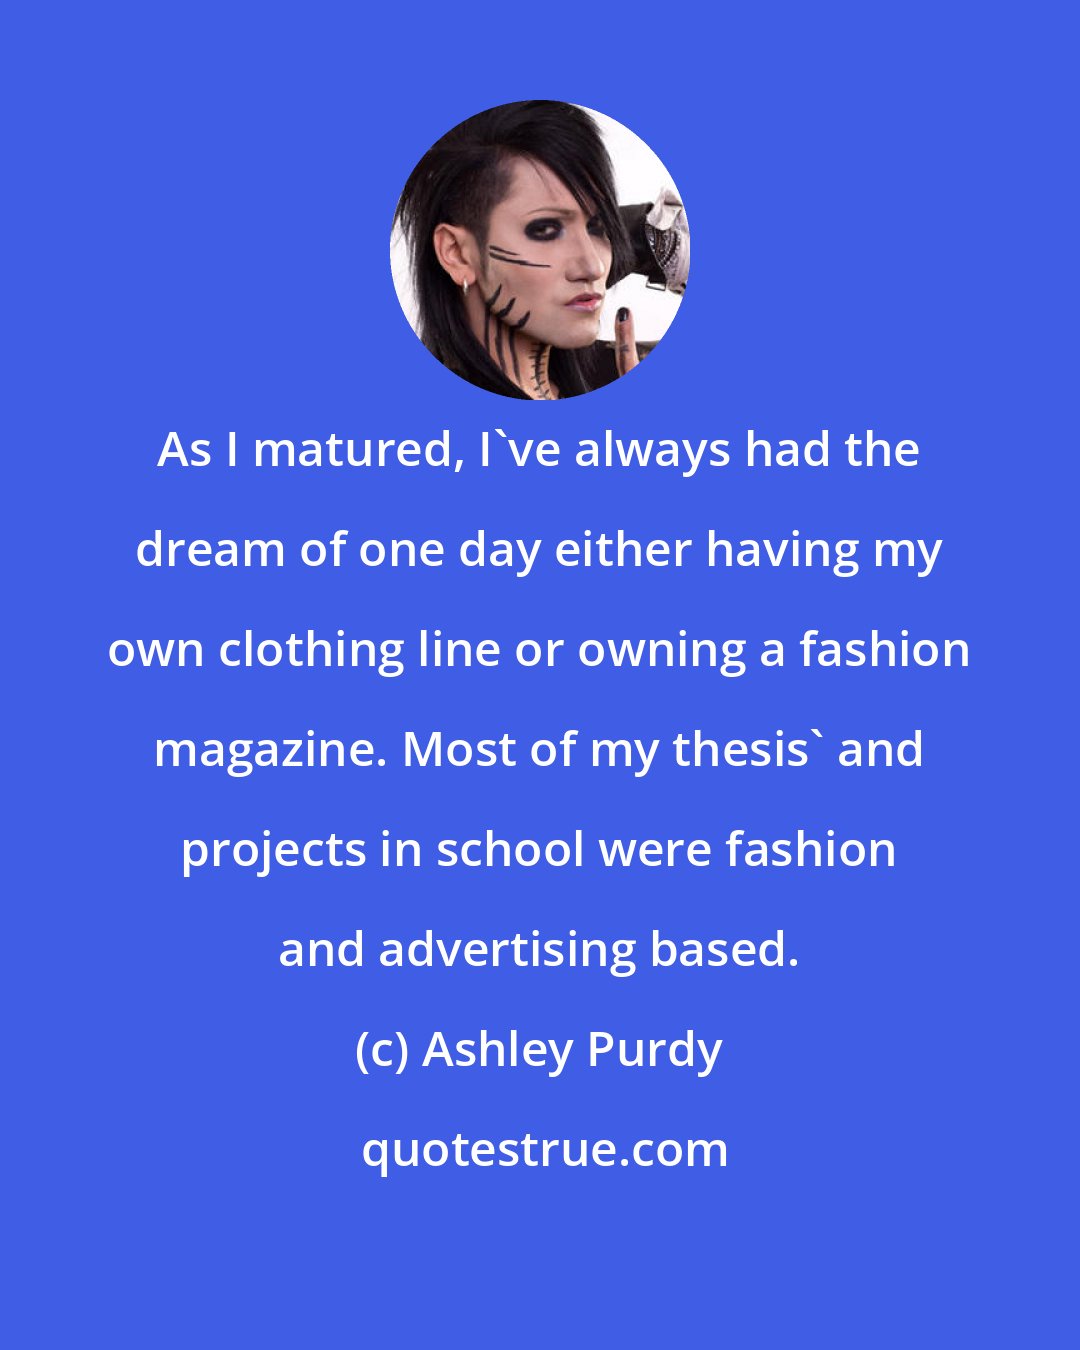 Ashley Purdy: As I matured, I've always had the dream of one day either having my own clothing line or owning a fashion magazine. Most of my thesis' and projects in school were fashion and advertising based.